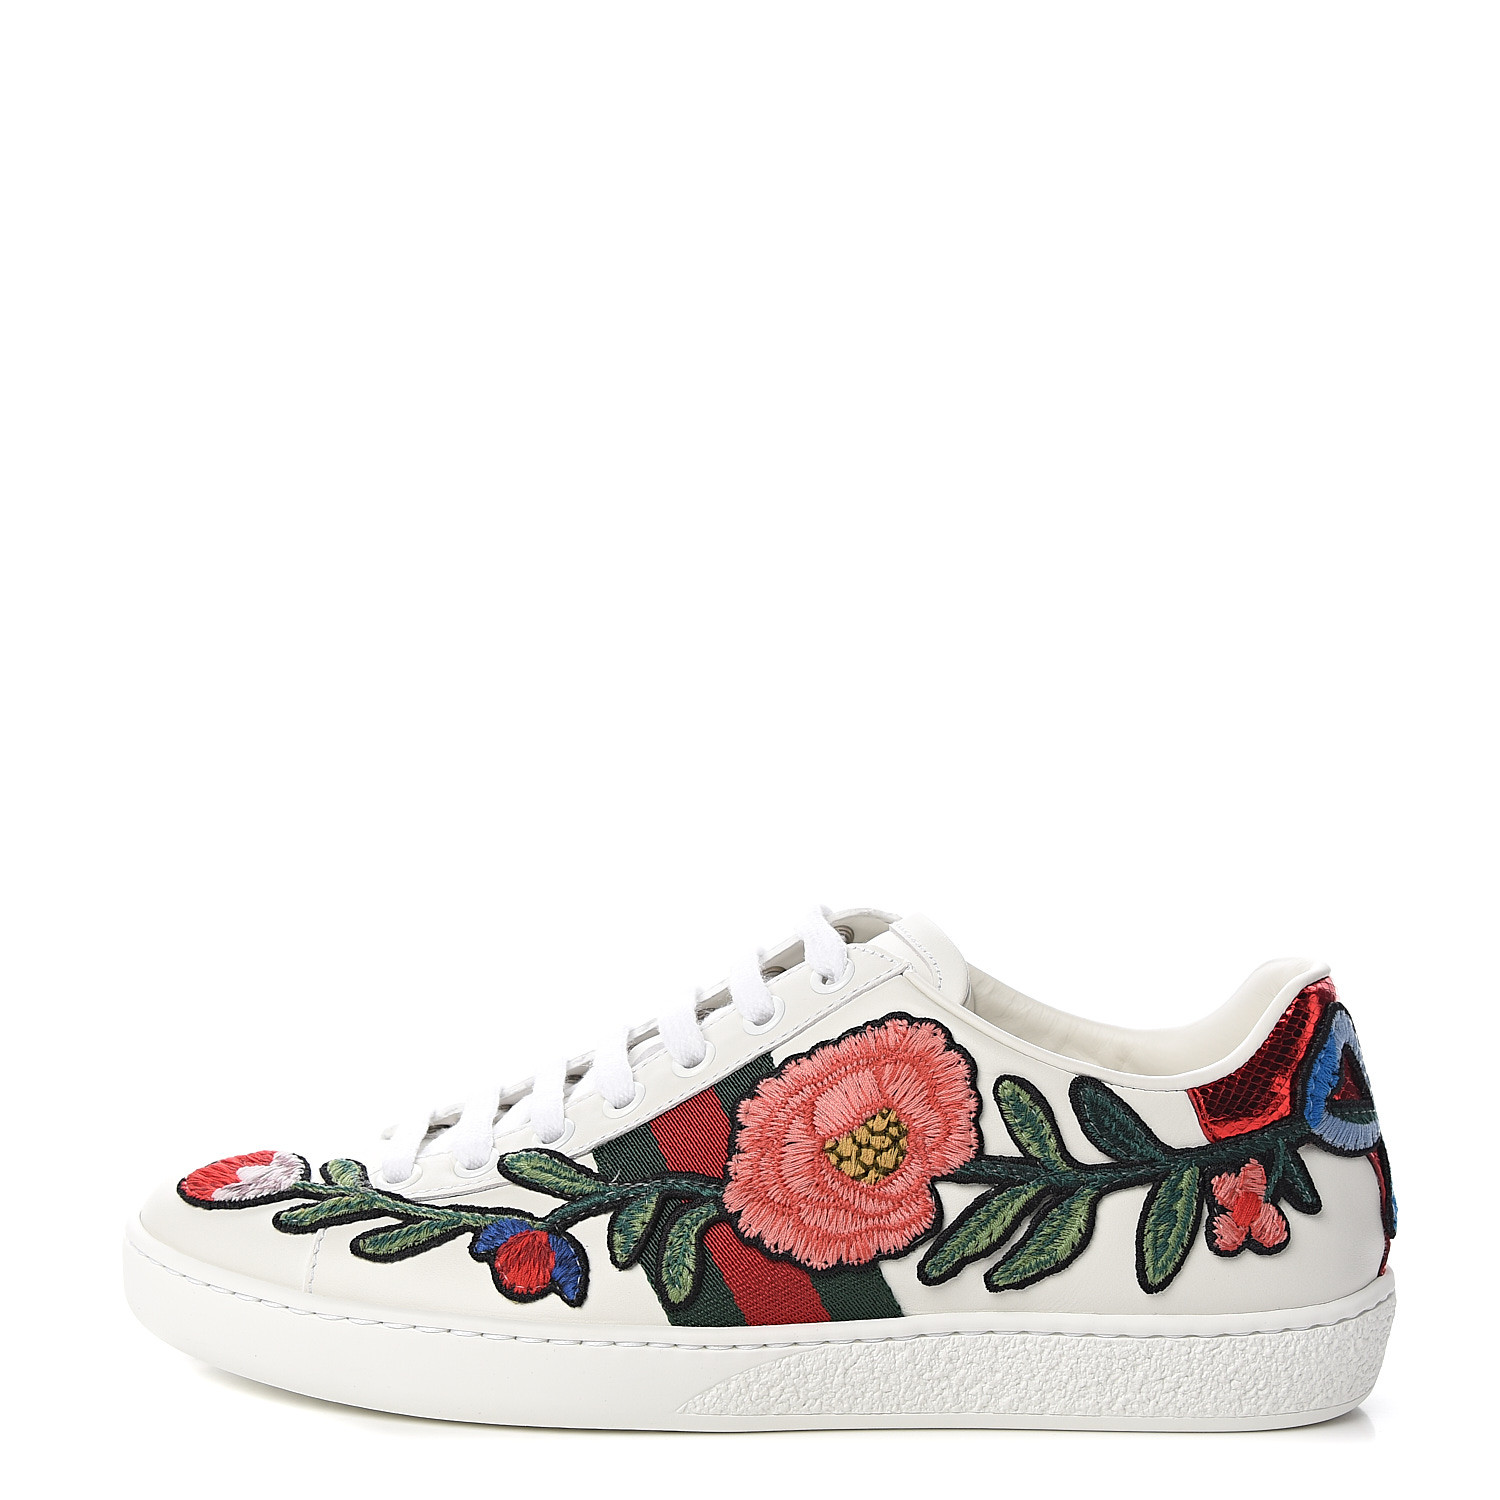 GUCCI Calfskin Web Floral Embroidered Womens Ace Sneakers 36 White 538577